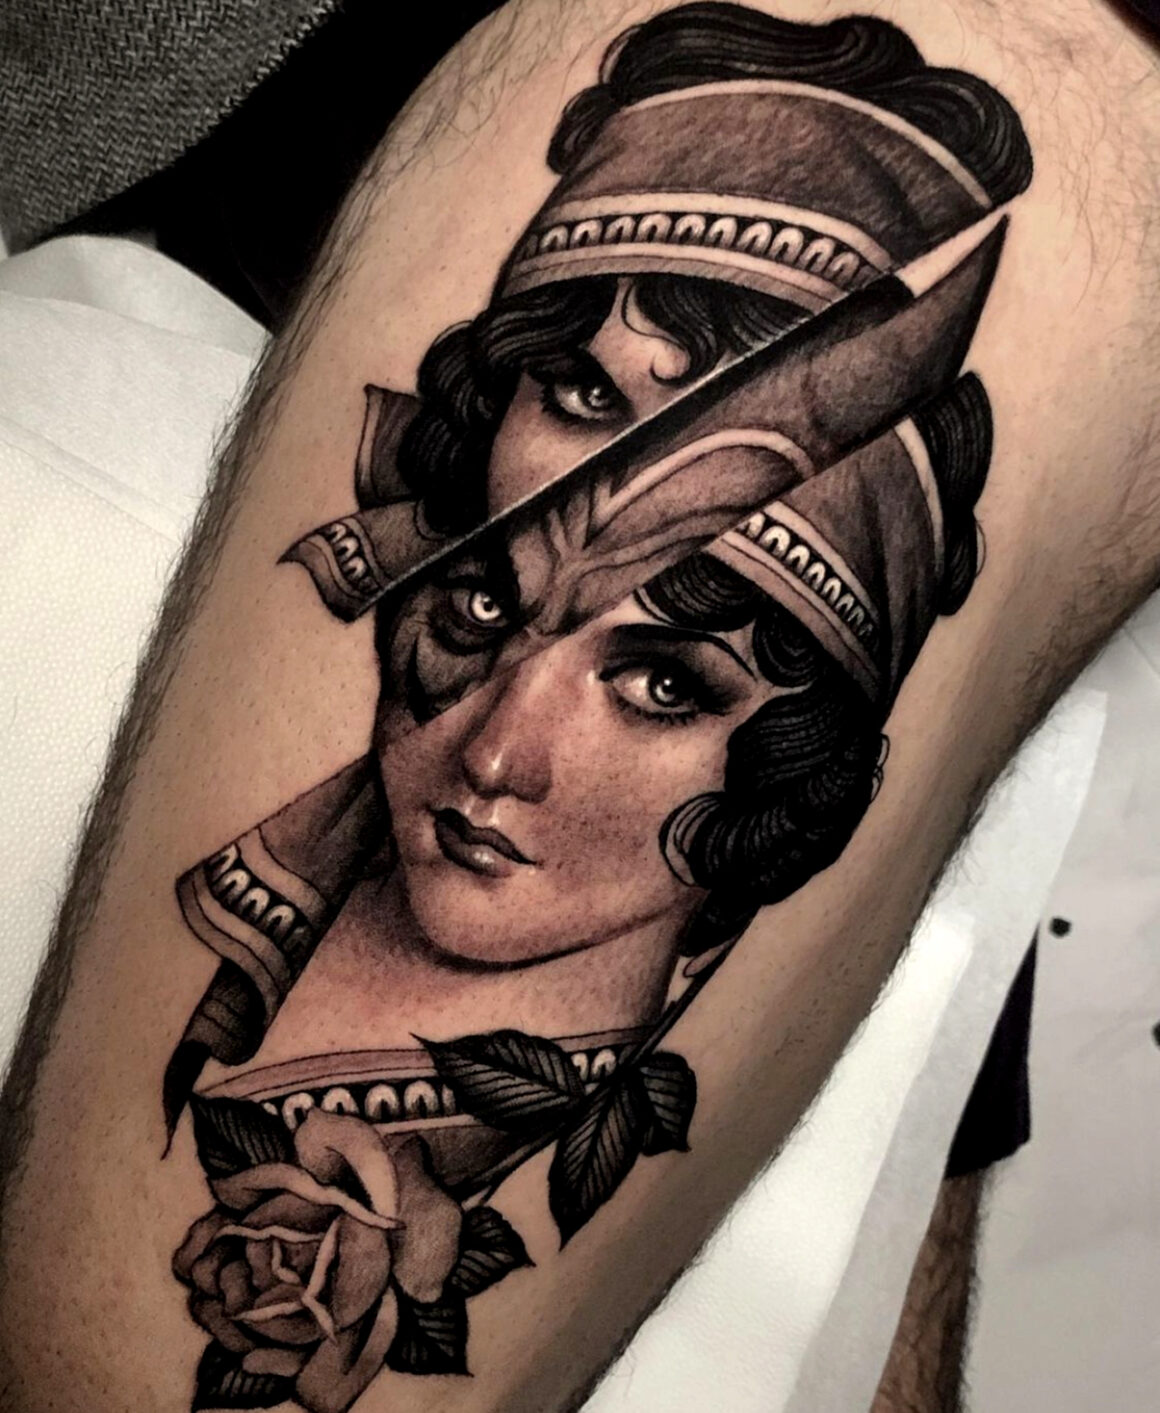 Tattoo by Andres Inkman, @andresinkman